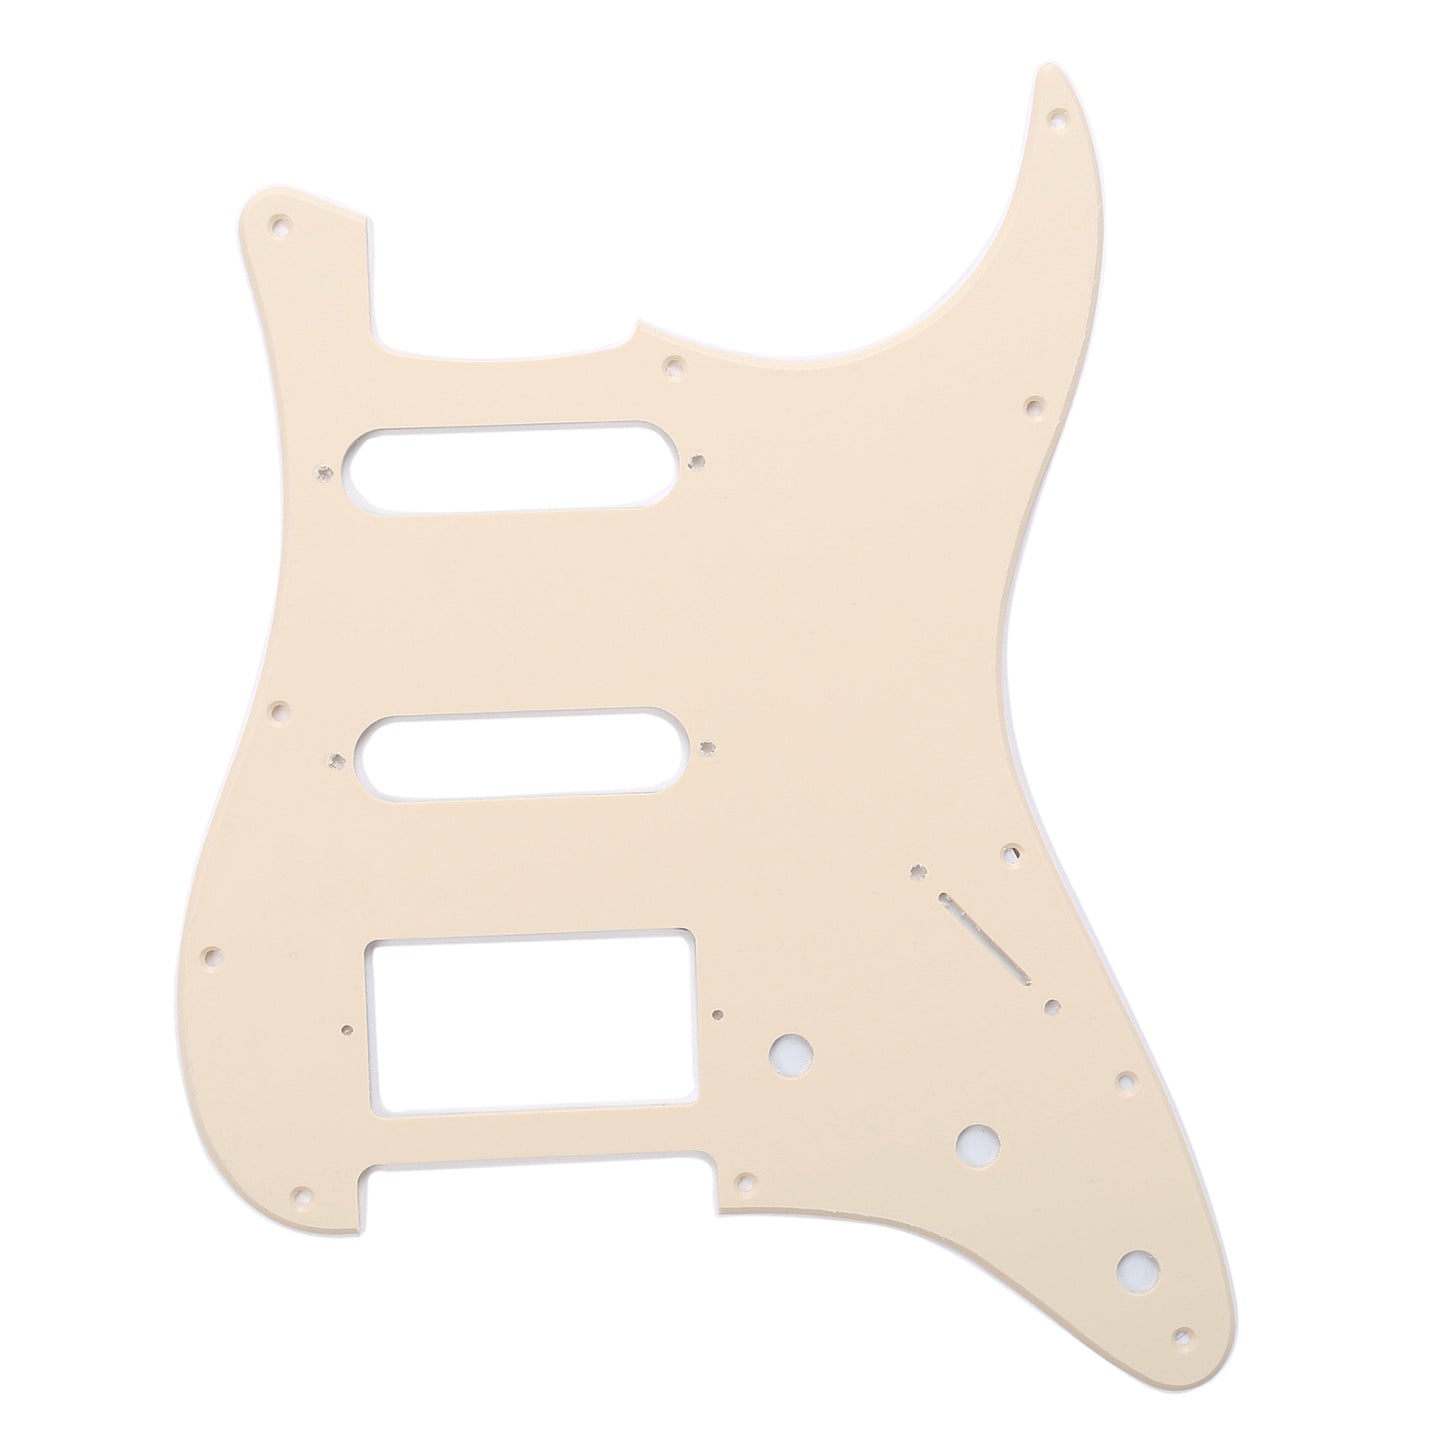 Musiclily HSS 11 Hole Guitar Strat Pickguard for Fender USA/Mexican Made Standard Stratocaster Modern Style,1Ply Cream